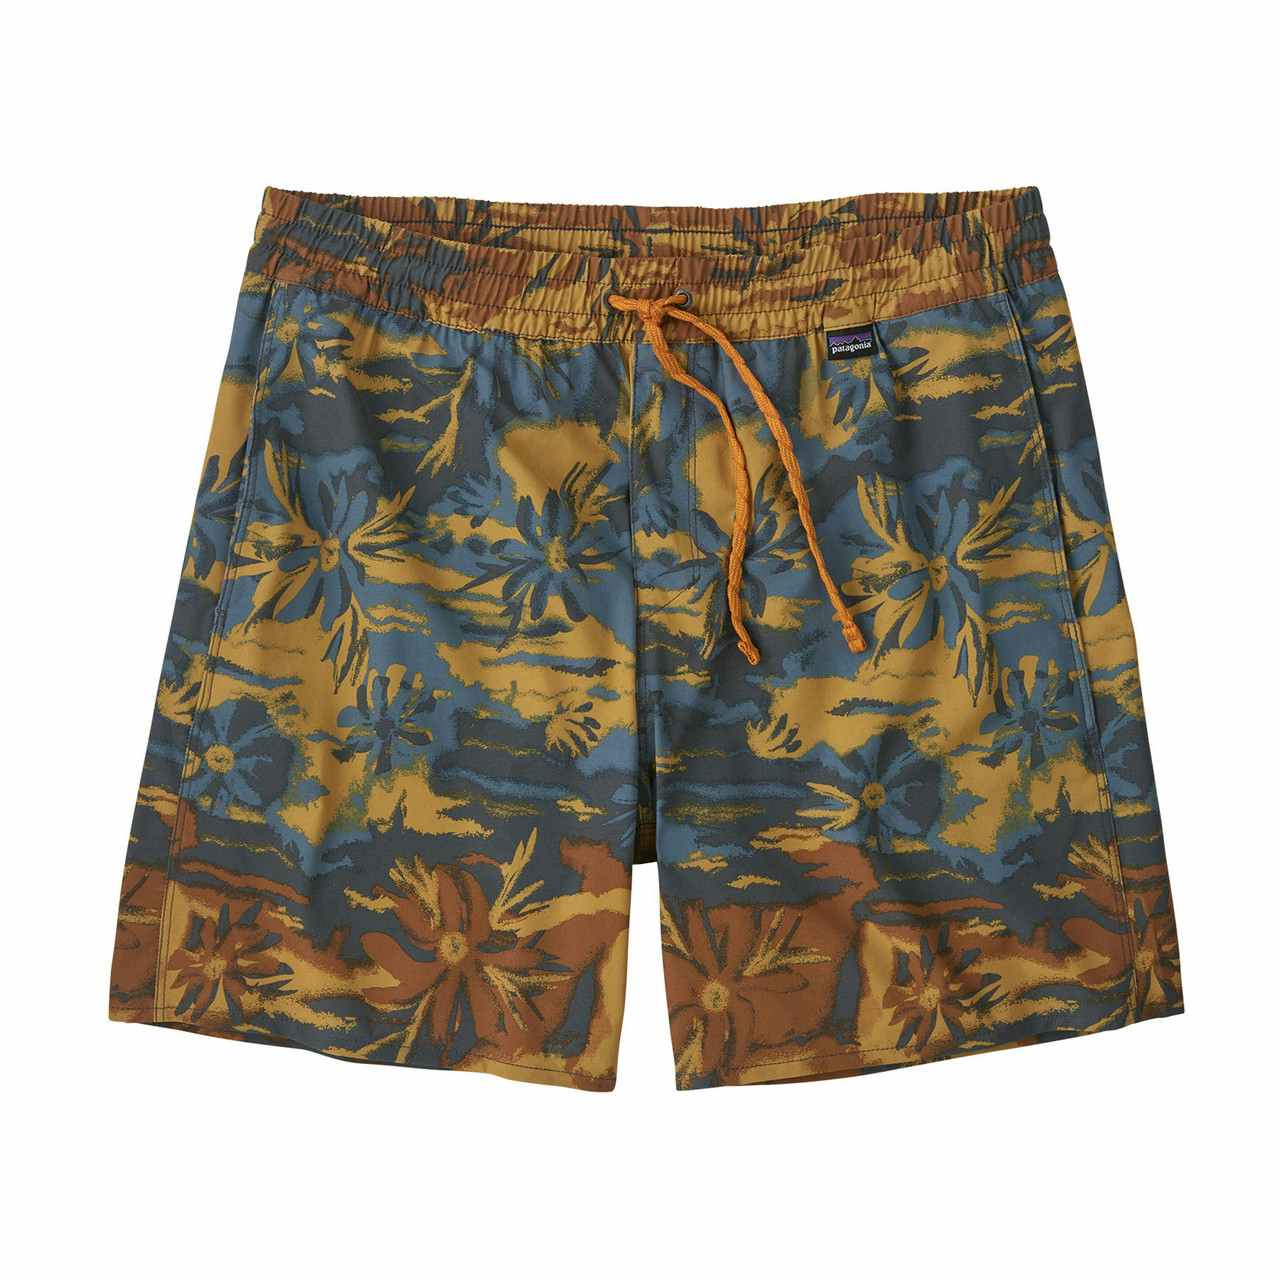 Hydropeak Volley 16 Inch Shorts Cliffs and Coves: Pufferf